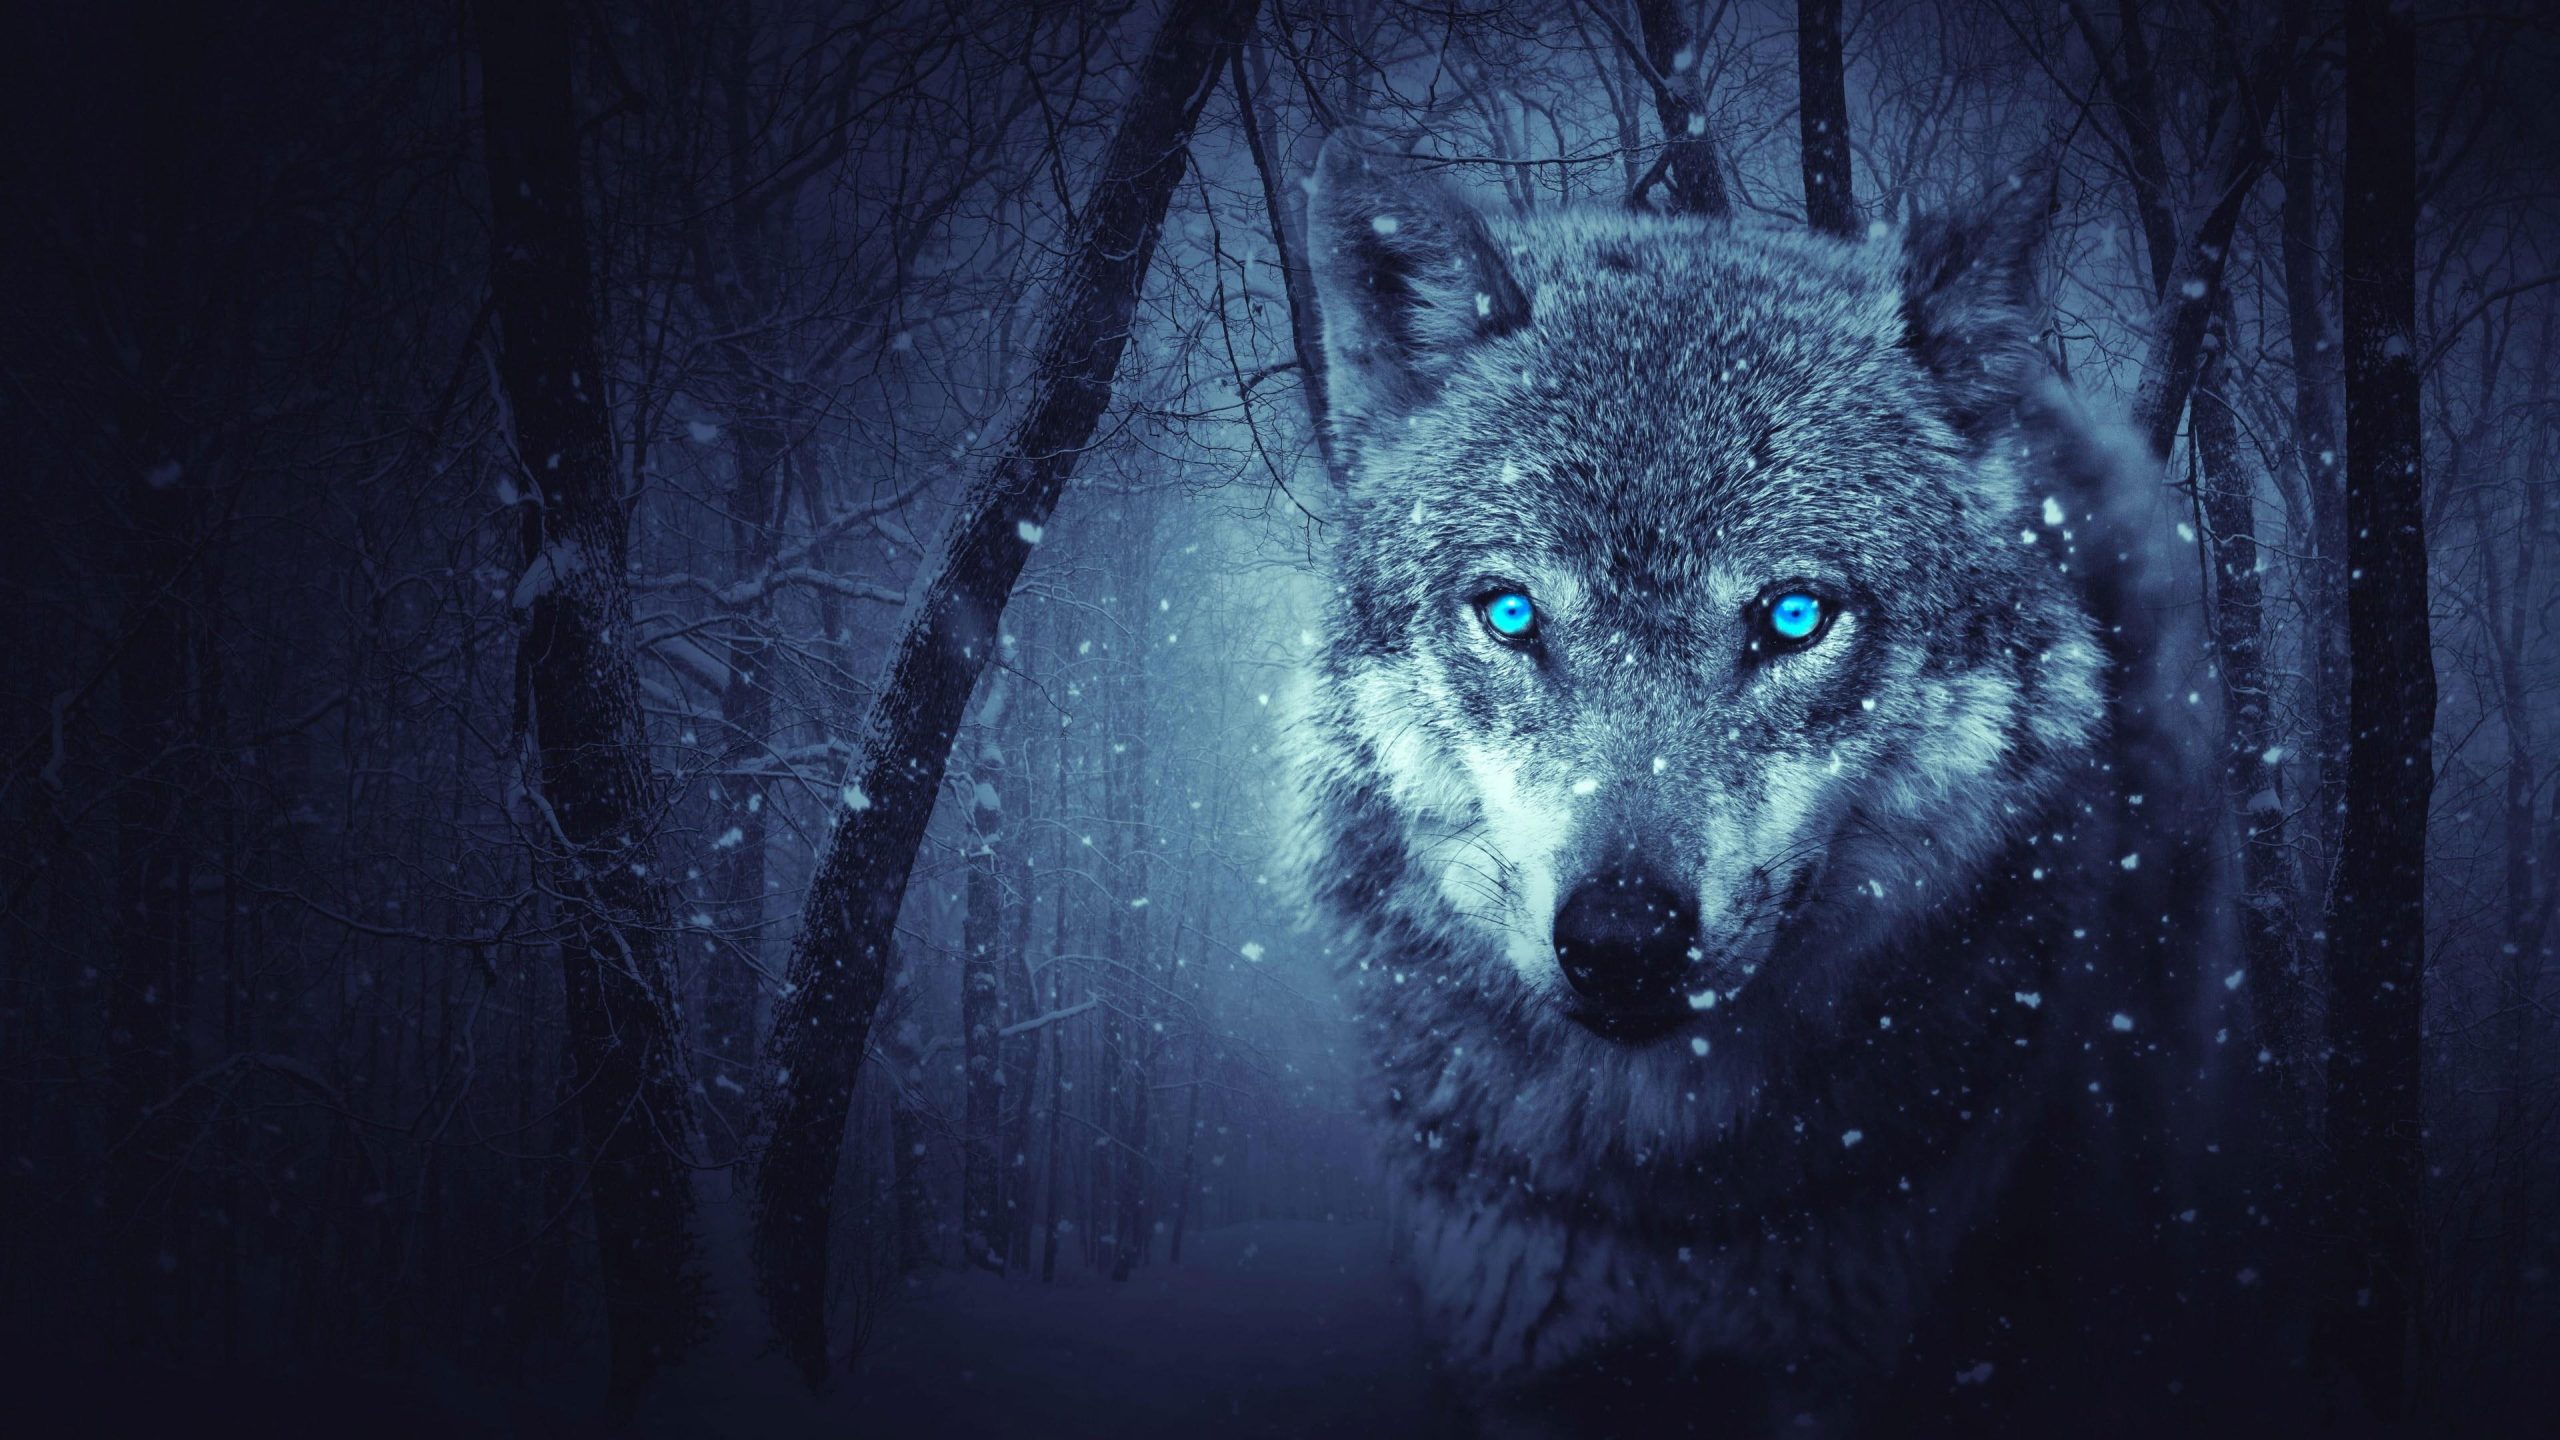 Wolf Wallpaper, Winter, Fantasy, Forest, Snowing, Wild Animal • Wallpaper For You